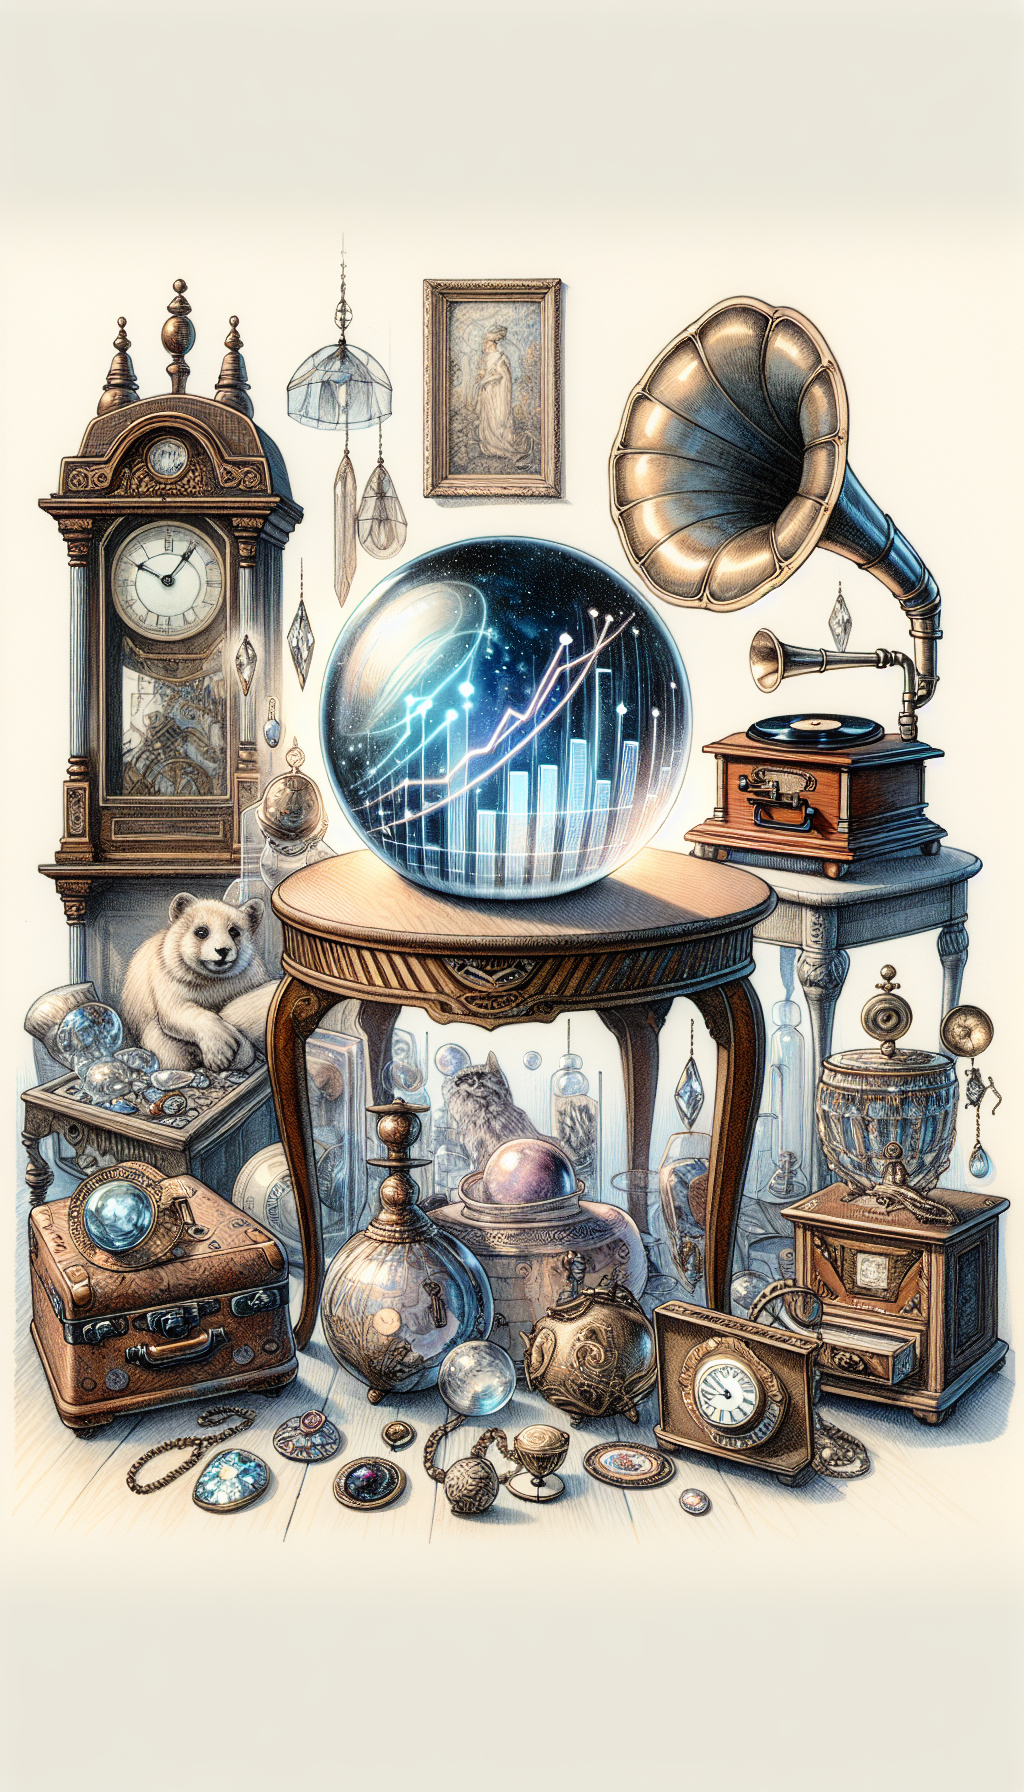 An illustration showcases a crystal ball on an ornate vintage table, surrounded by an array of antiques from different eras: a grandfather clock, a gramophone, a classic painting, and Art Deco jewelry. Reflecting within the ball are ascending graphs and dollar signs suggesting their rising future value. The image combines line art for the antiques and a watercolor effect for the predictive elements inside the crystal ball.